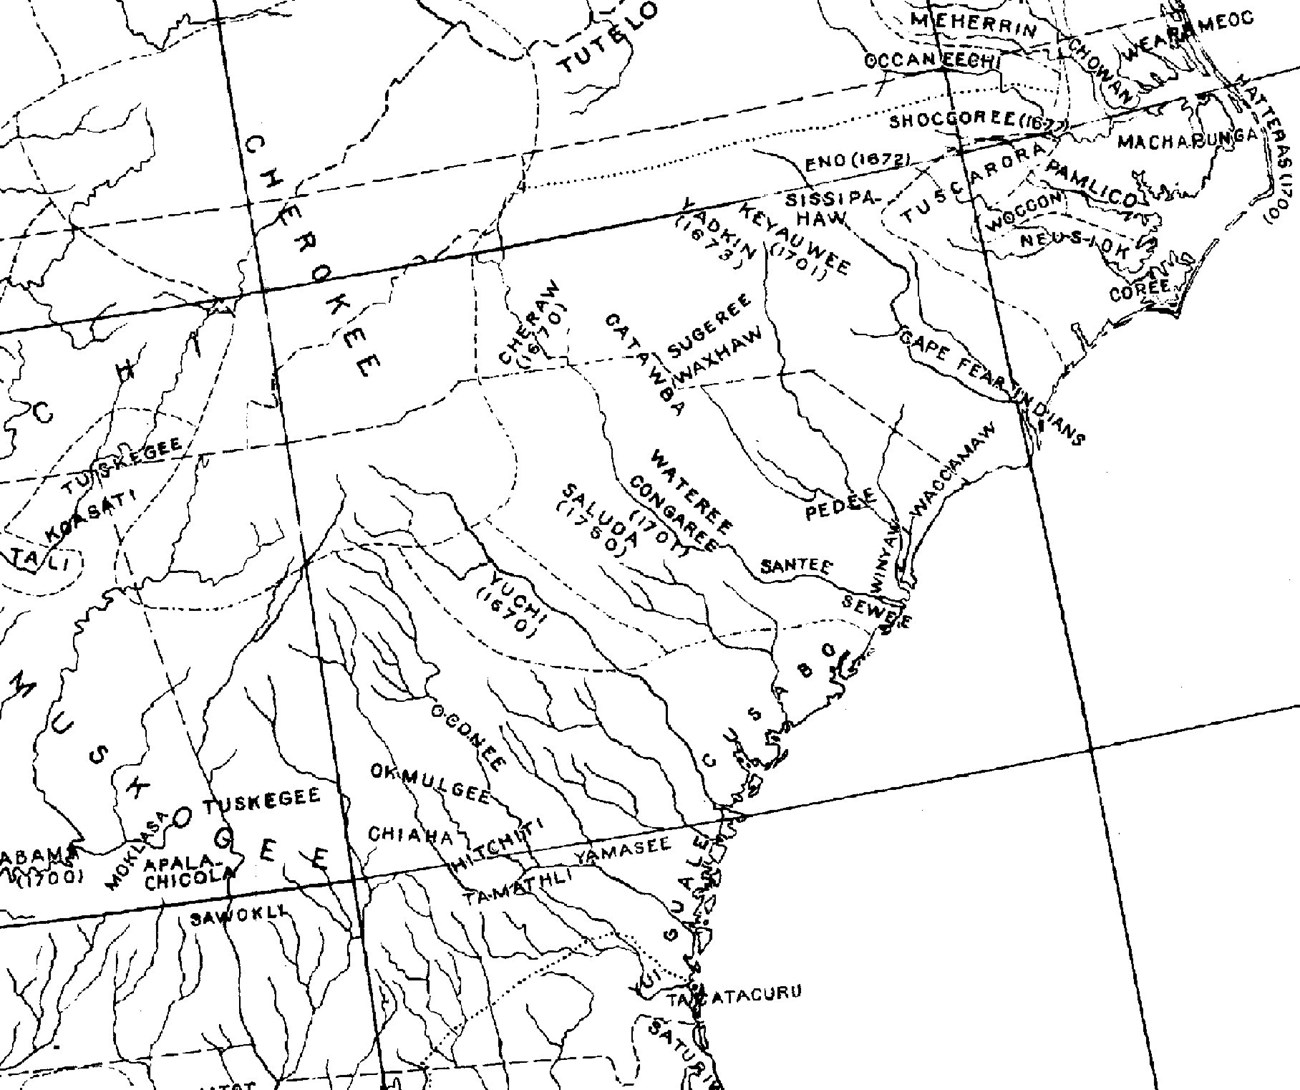 Image 3.  Locations of principal historic Indian tribes in the Southeast (Adapted From Swanton 1922:Map 5)